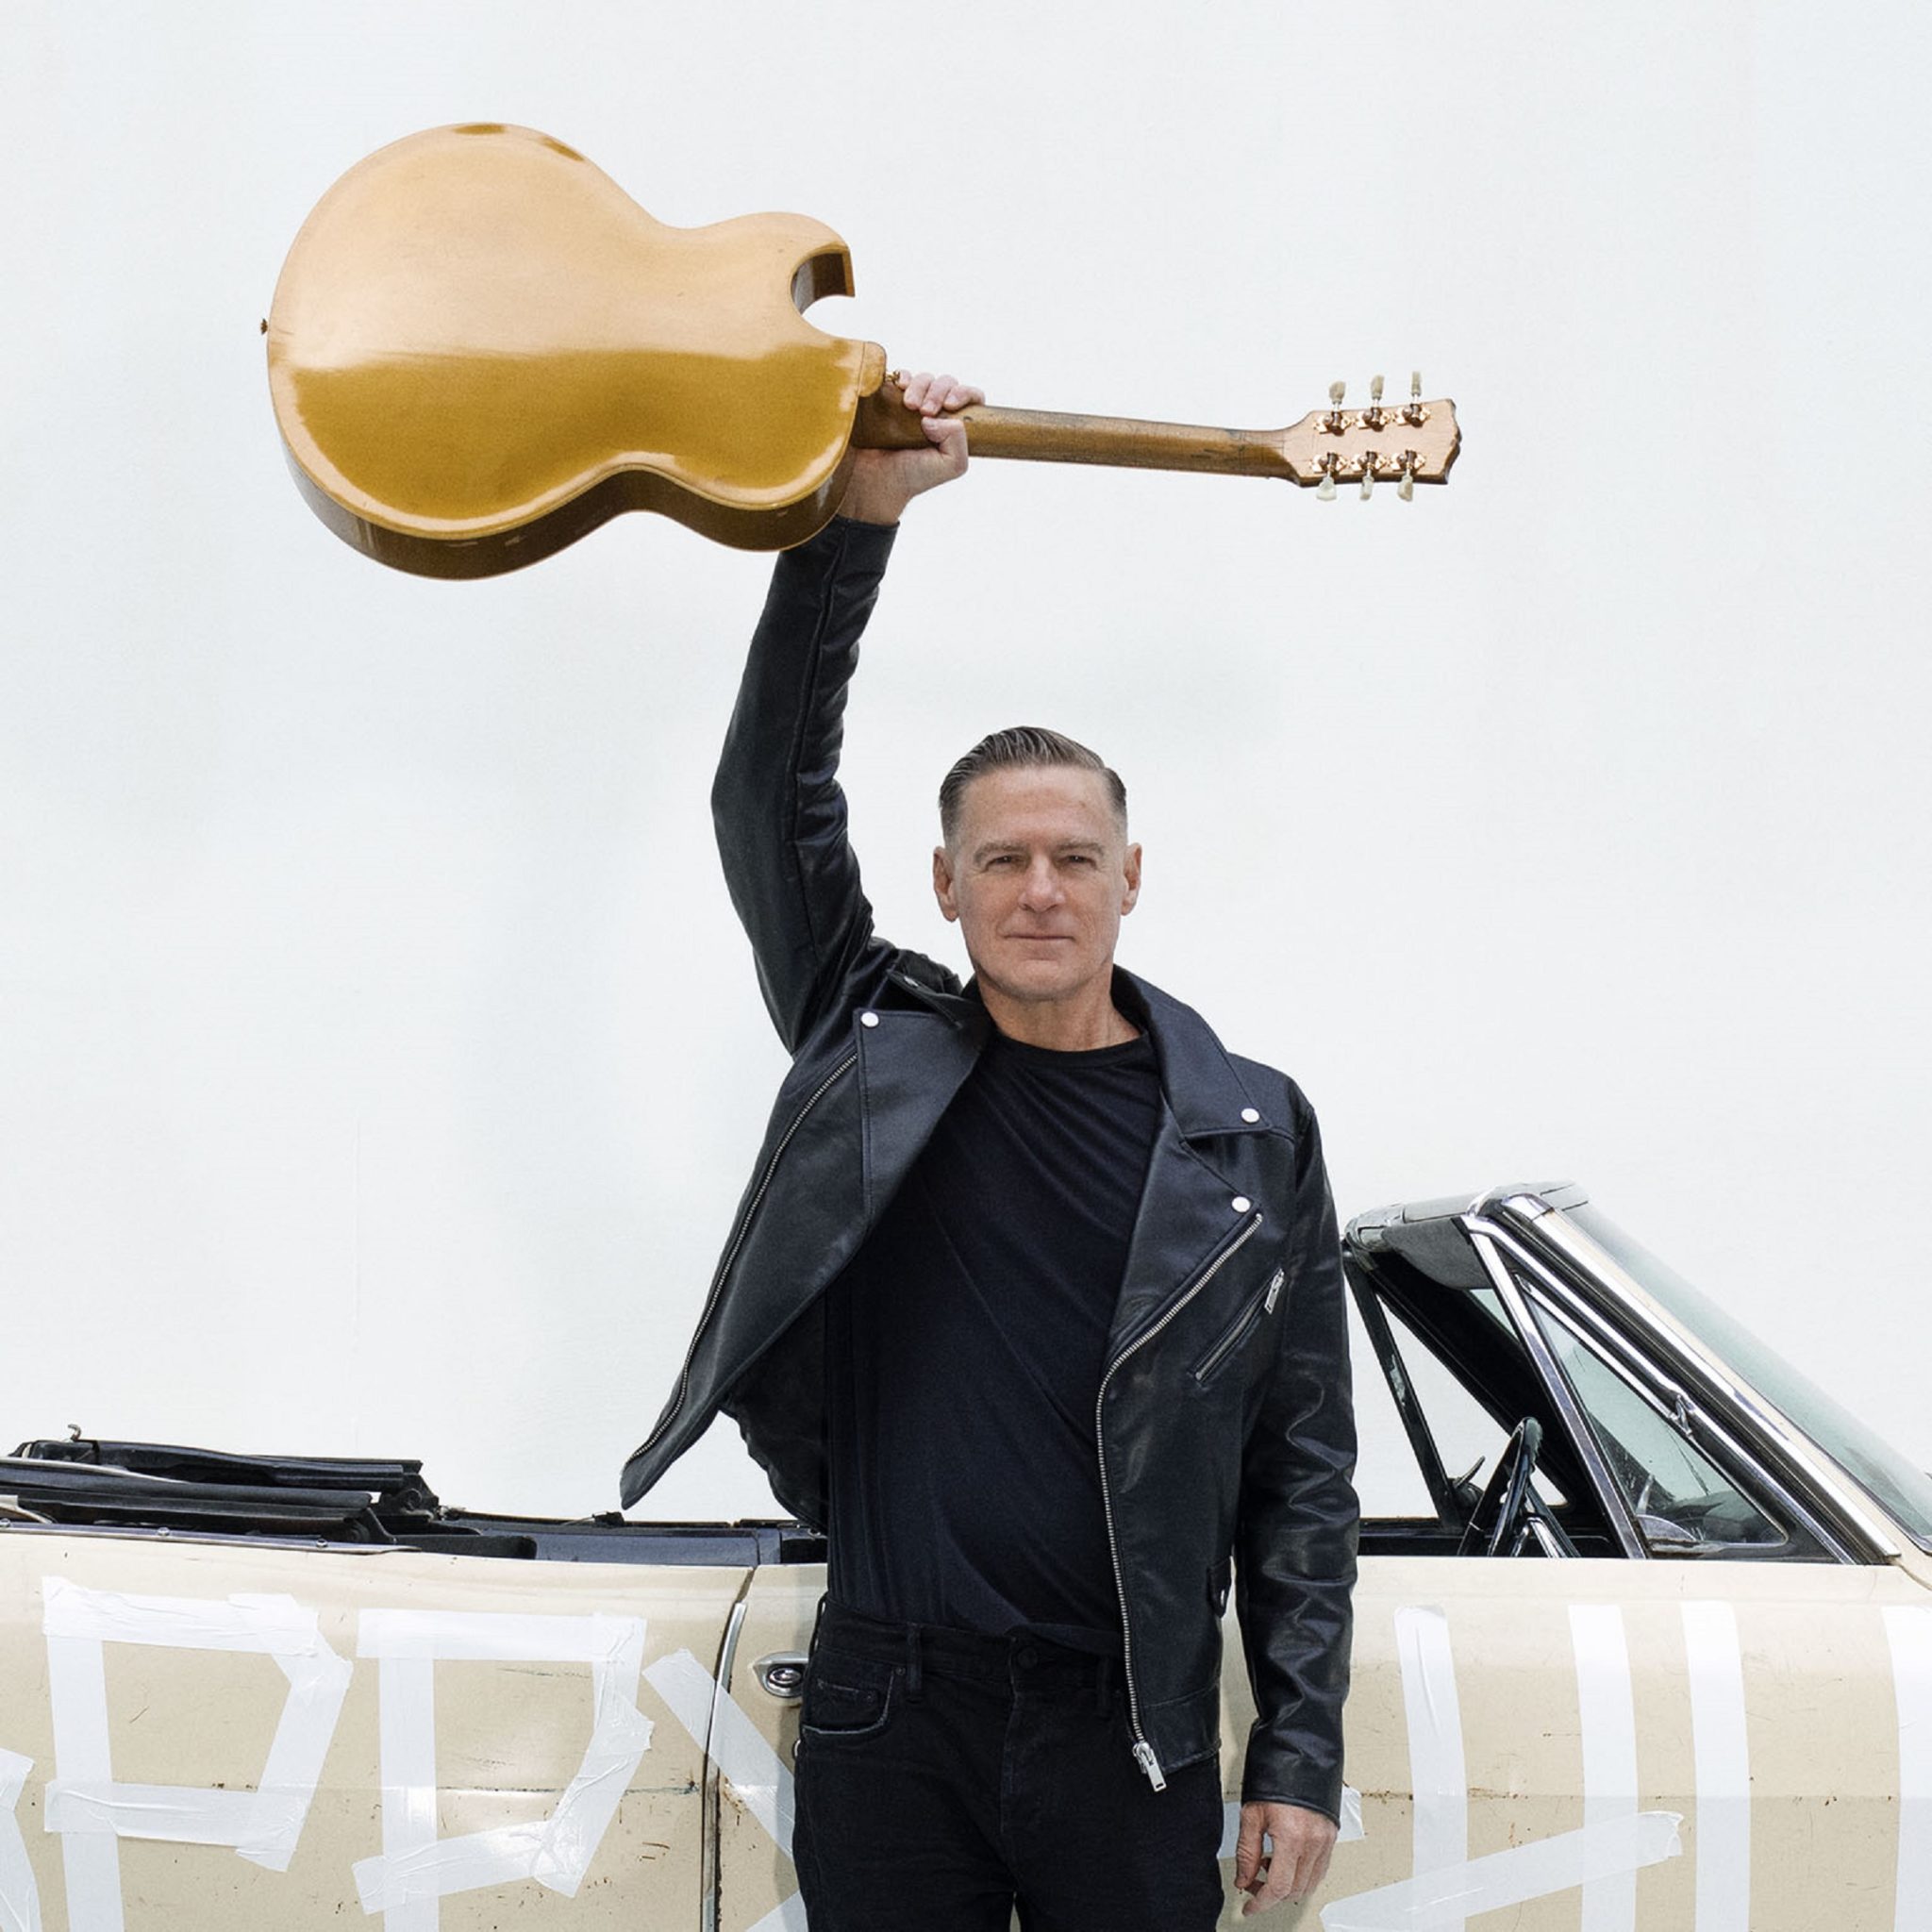 Bryan Adams will bring his effortless stage presence and incredible